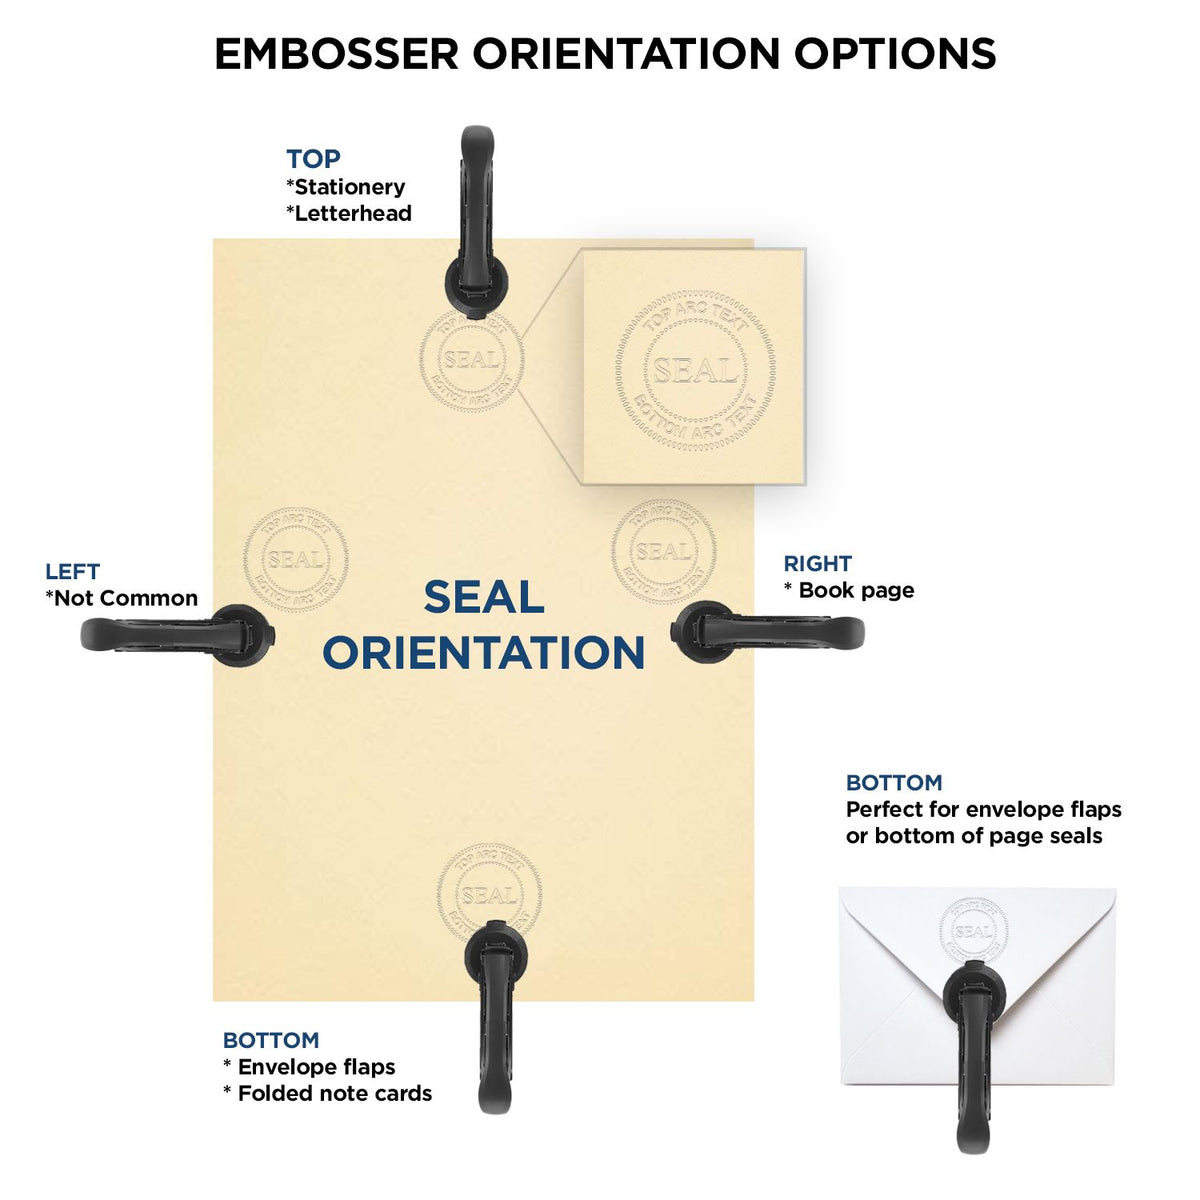 An infographic for the Long Reach Indiana Land Surveyor Seal showing embosser orientation, this is showing examples of a top, bottom, right and left insert.